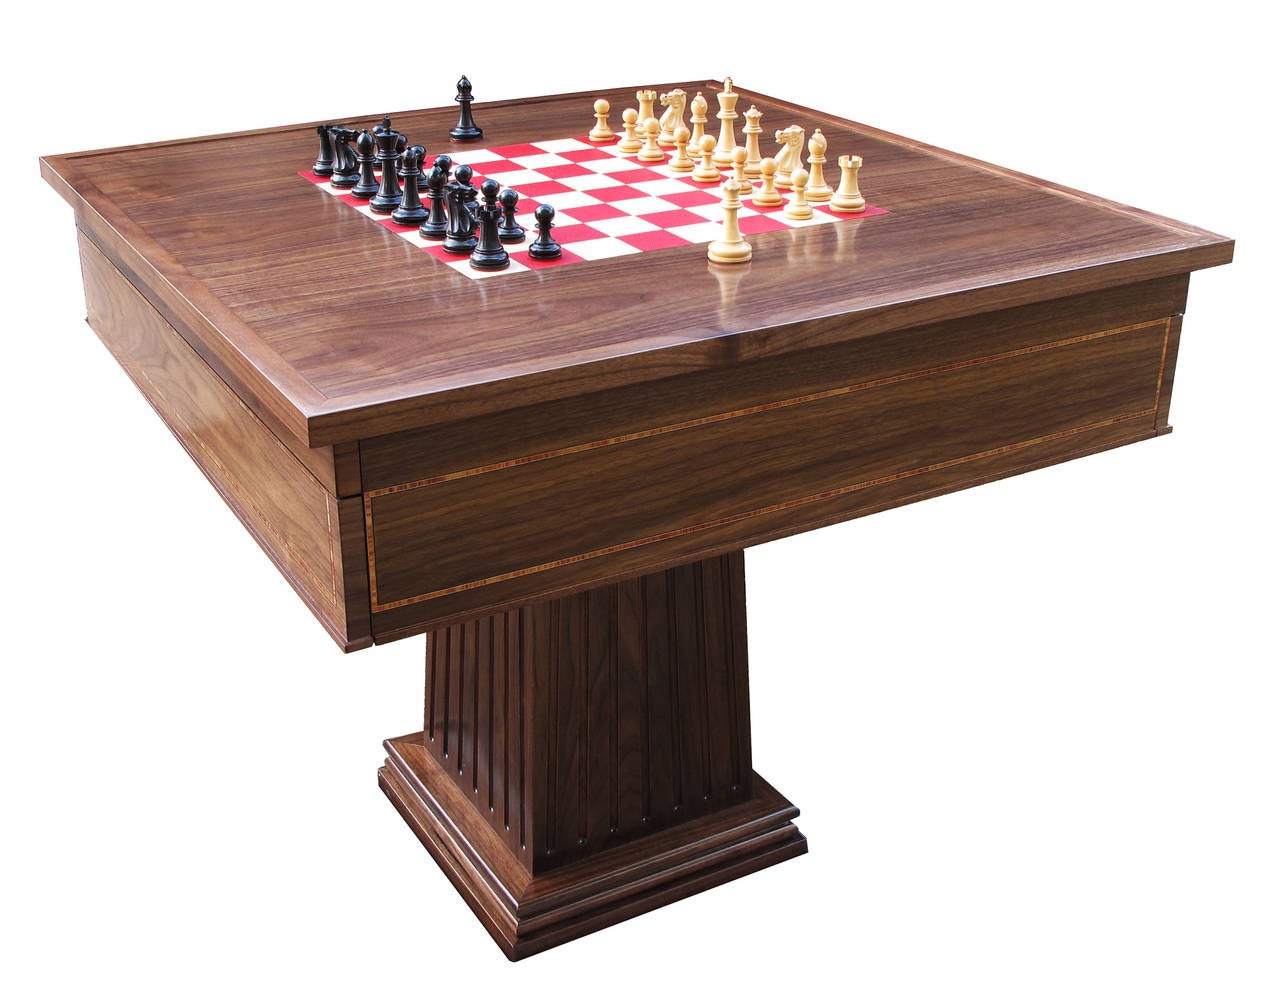 A beautiful wood table with leather inlays belies its hidden treasures of eight classic games: chess, backgammon, bridge, poker, dominoes, poker dice, roulette and checkers.

We specialize in custom commissions.
Custom materials, finishes and